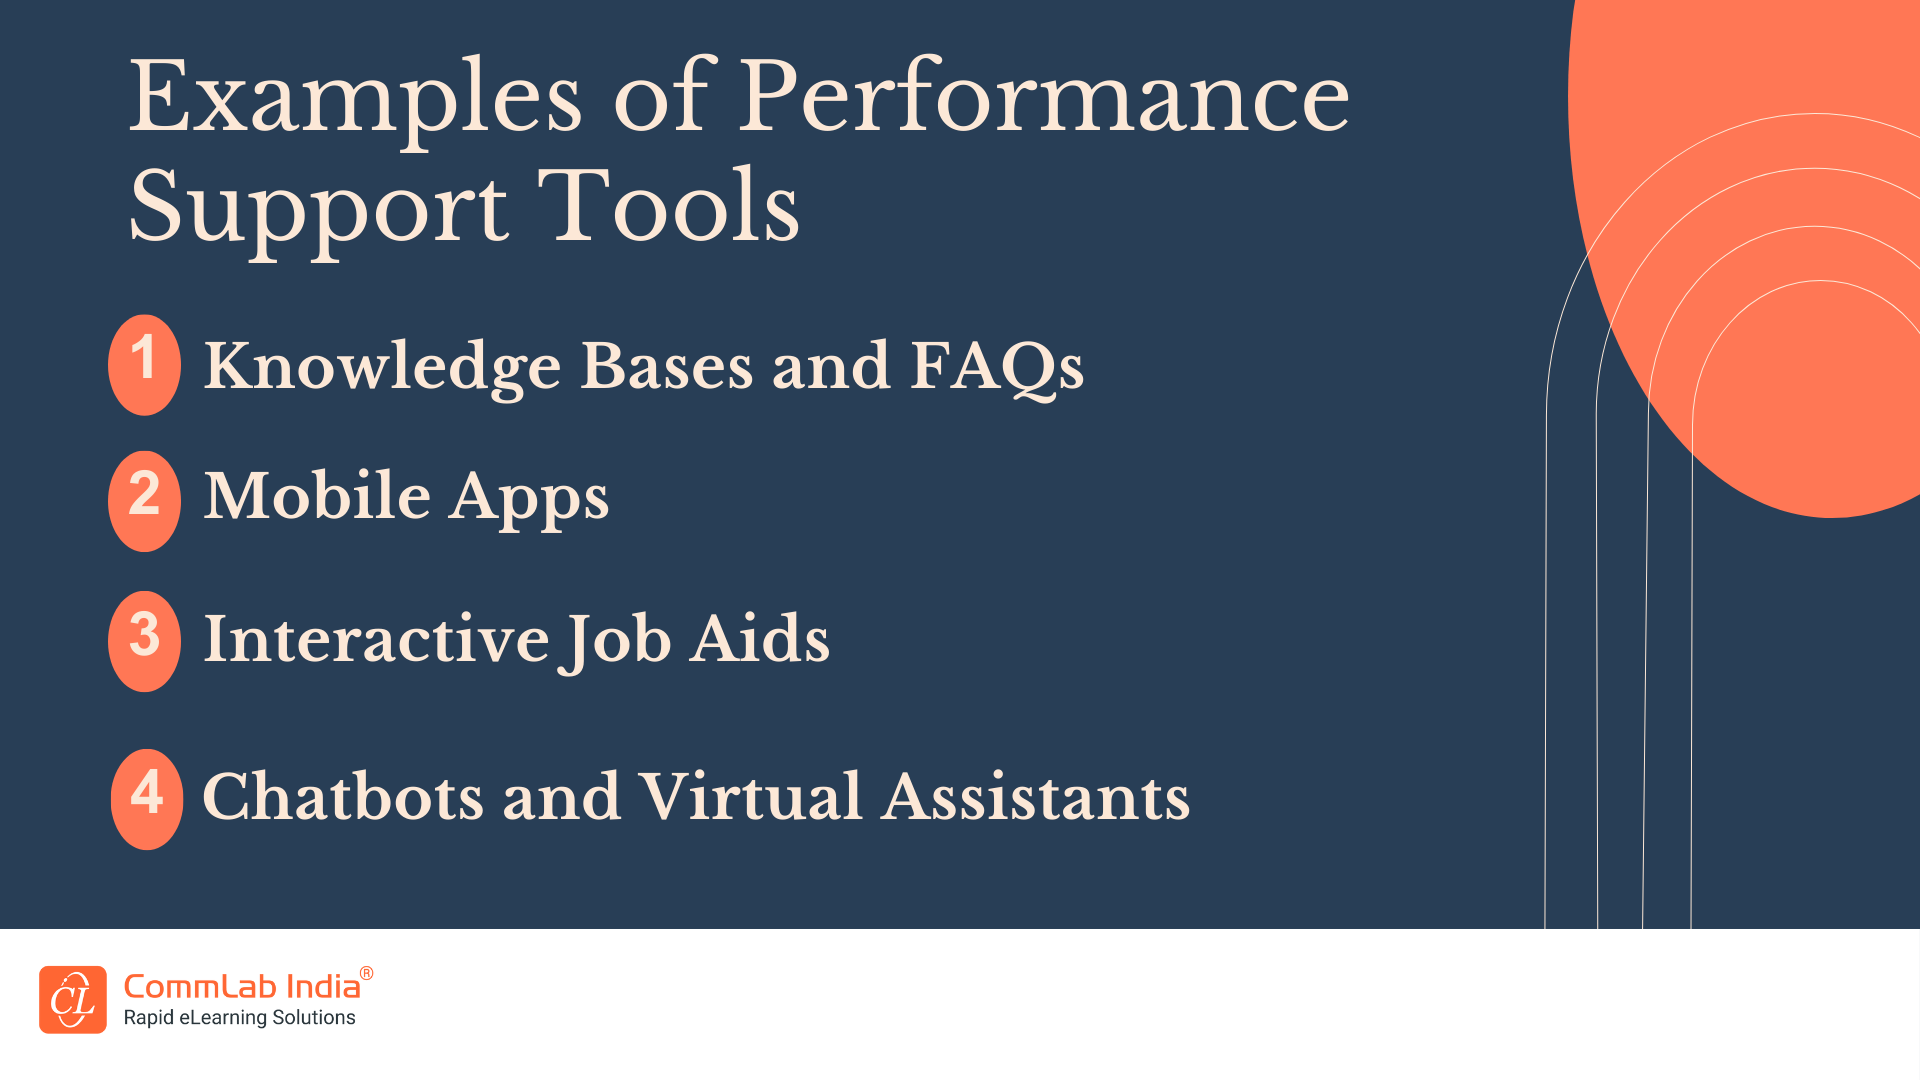 Examples of Performance Support Tools